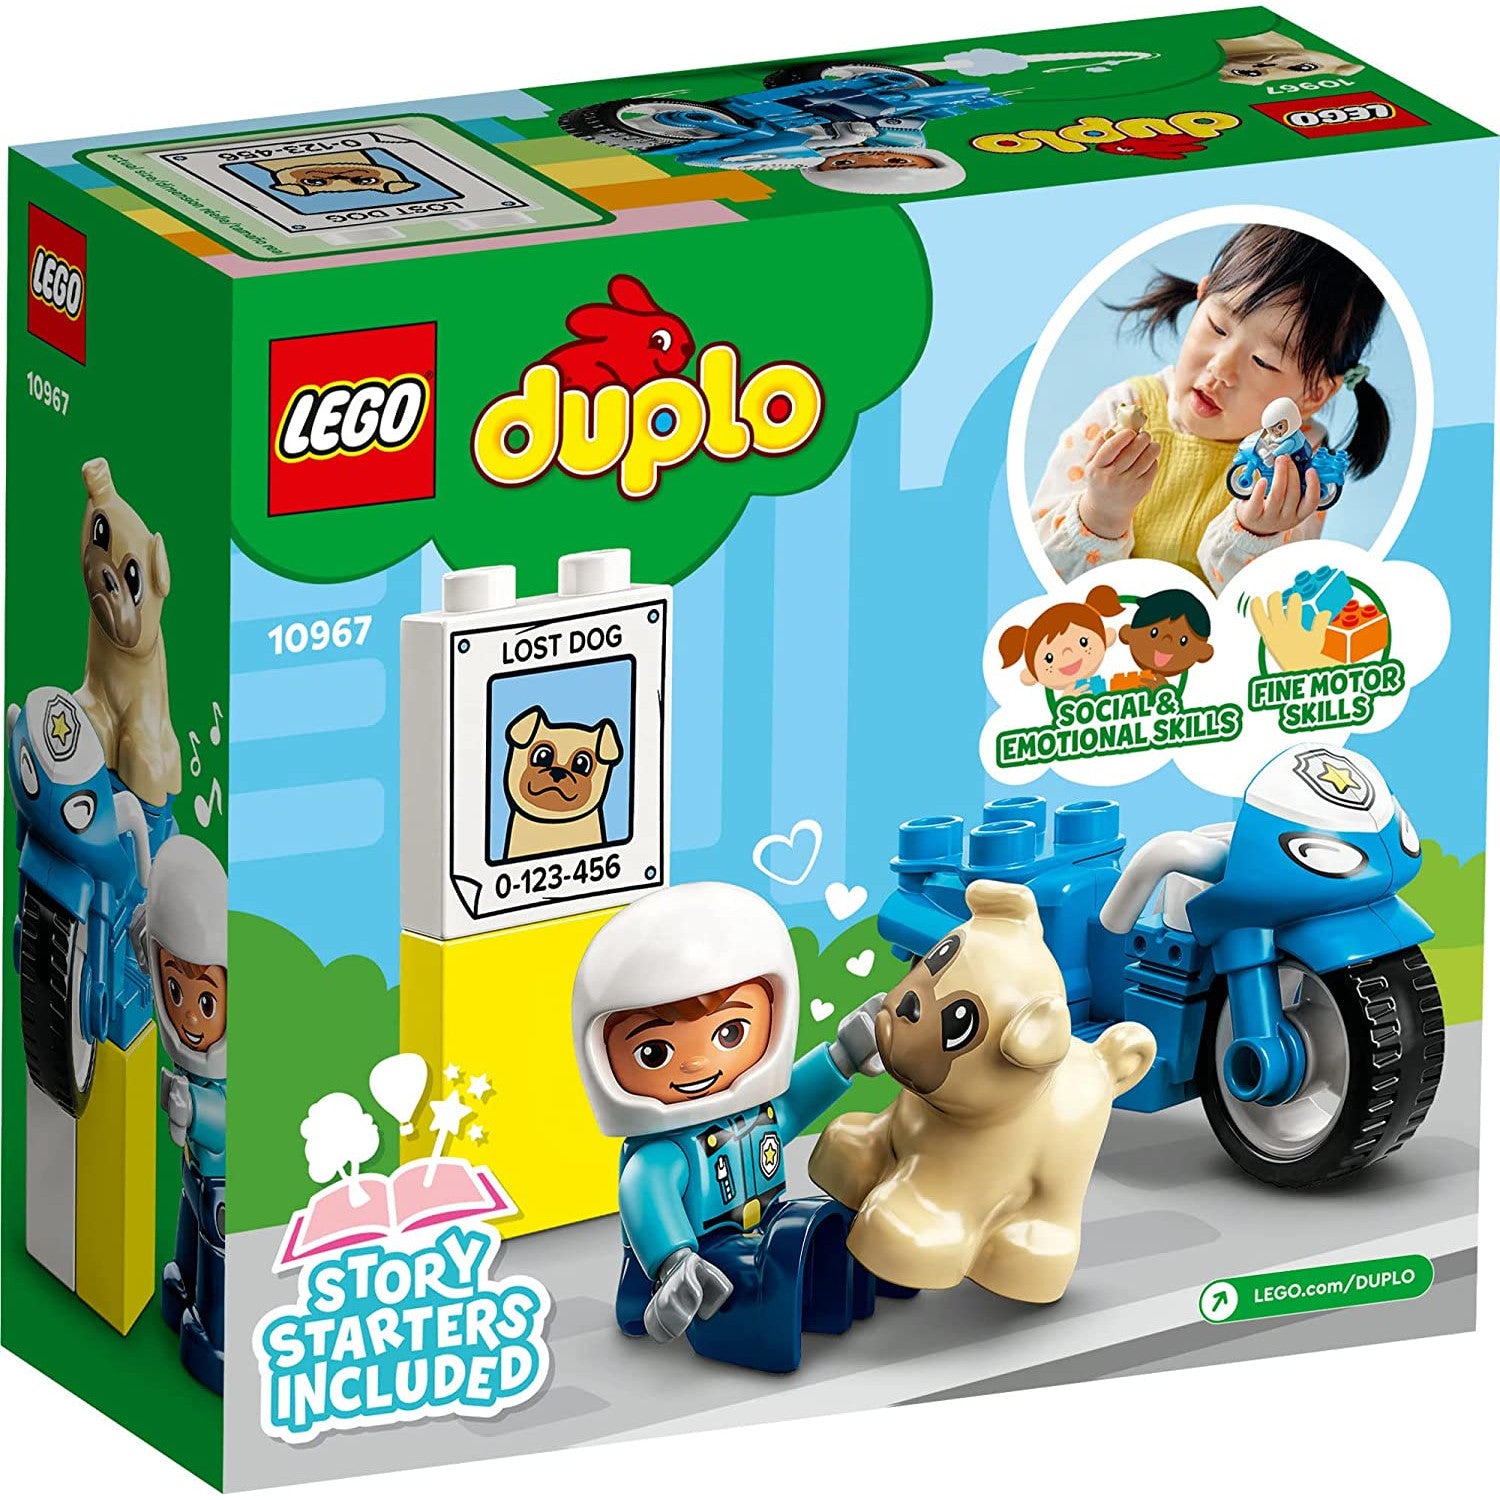 DUPLO by LEGO Police Motorcycle 10967 4